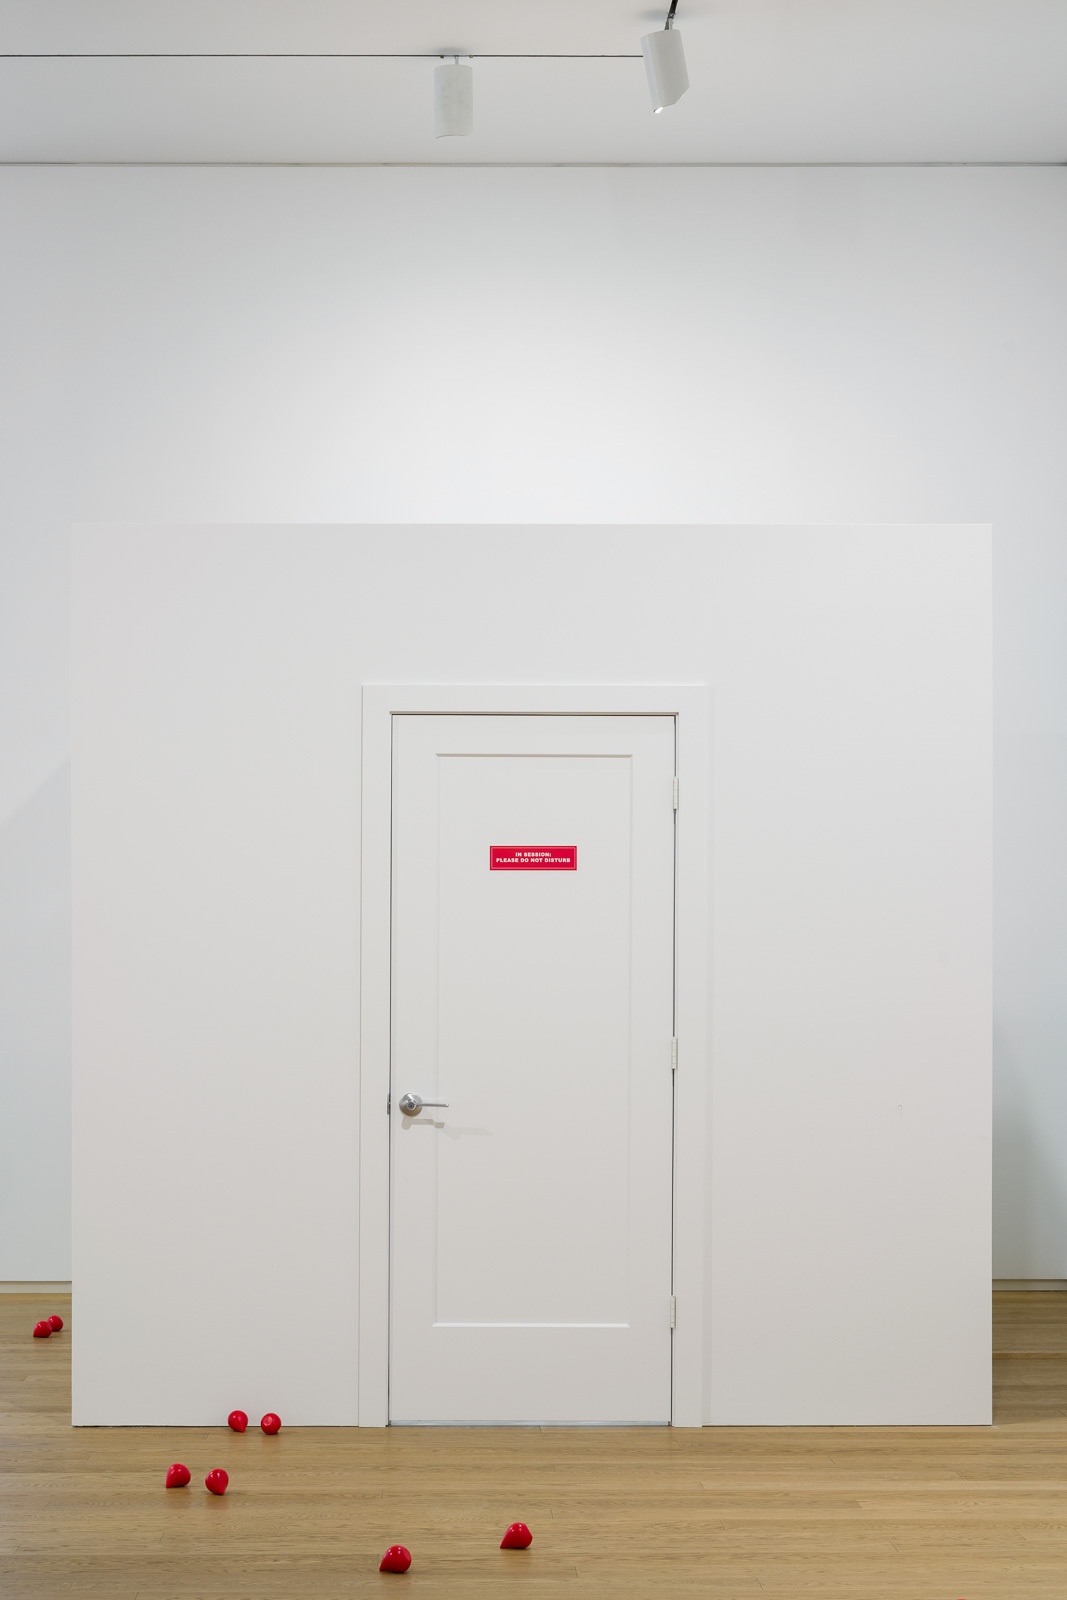 Consultation room for HIV testing, 2019. Room, furniture, HIV testing services. Dimensions variable